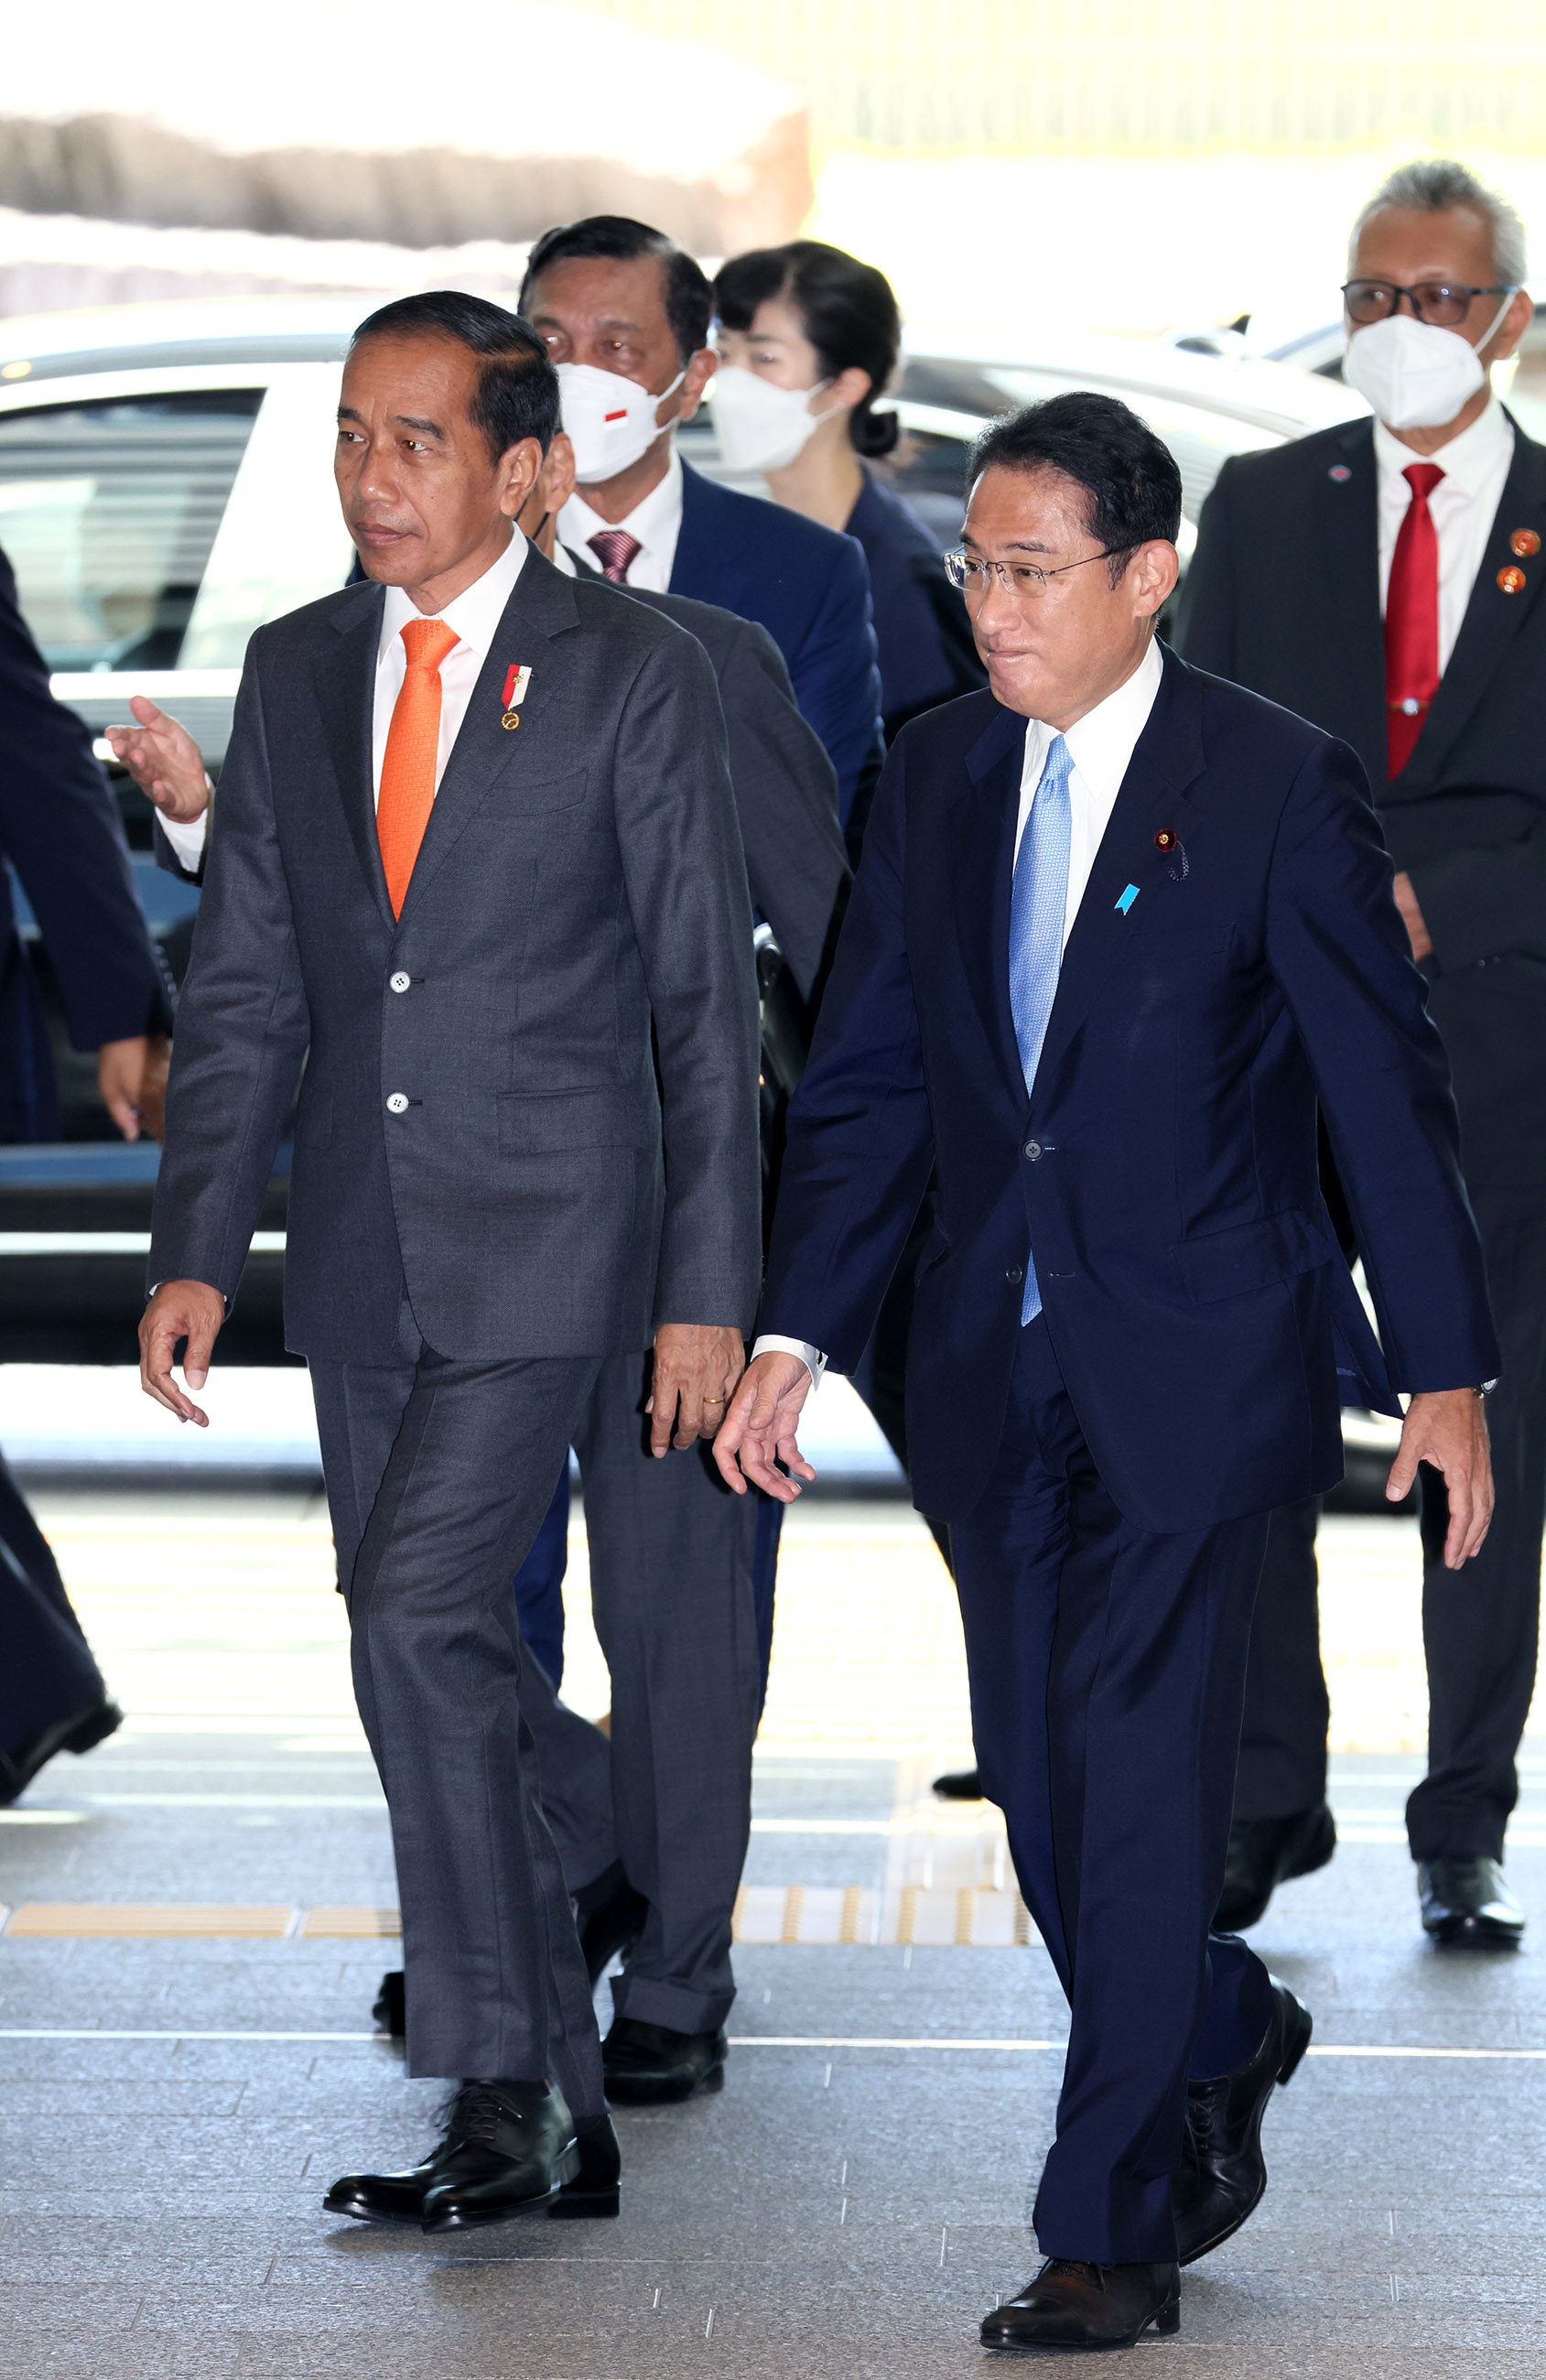 Photograph of the Prime Minister welcoming President Widodo